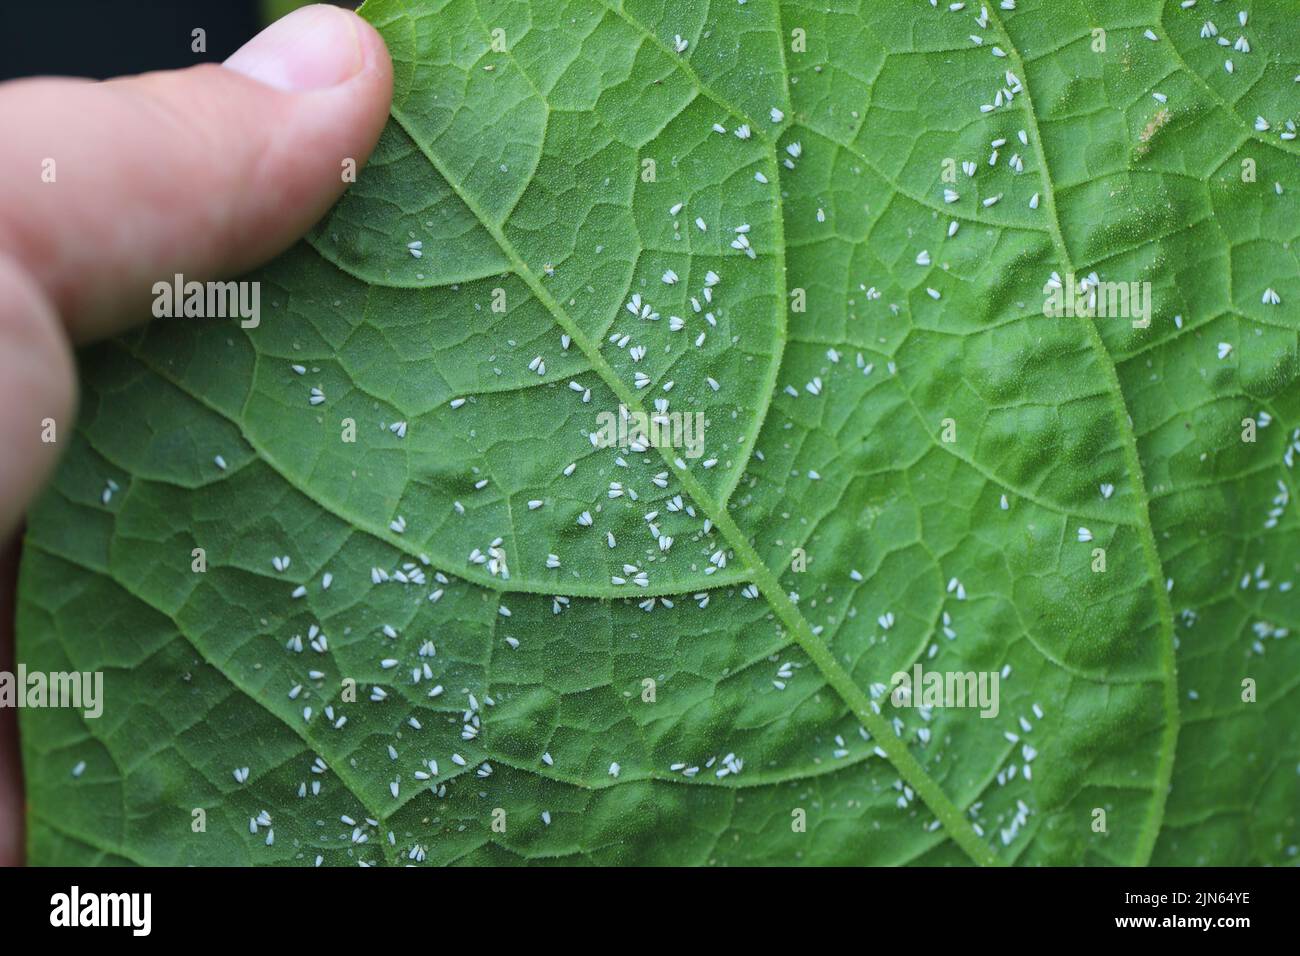 Glasshouse whitefly (Trialeurodes vaporariorum) on the underside of pumpkin leaves. It is a currently important agricultural pest. Stock Photo